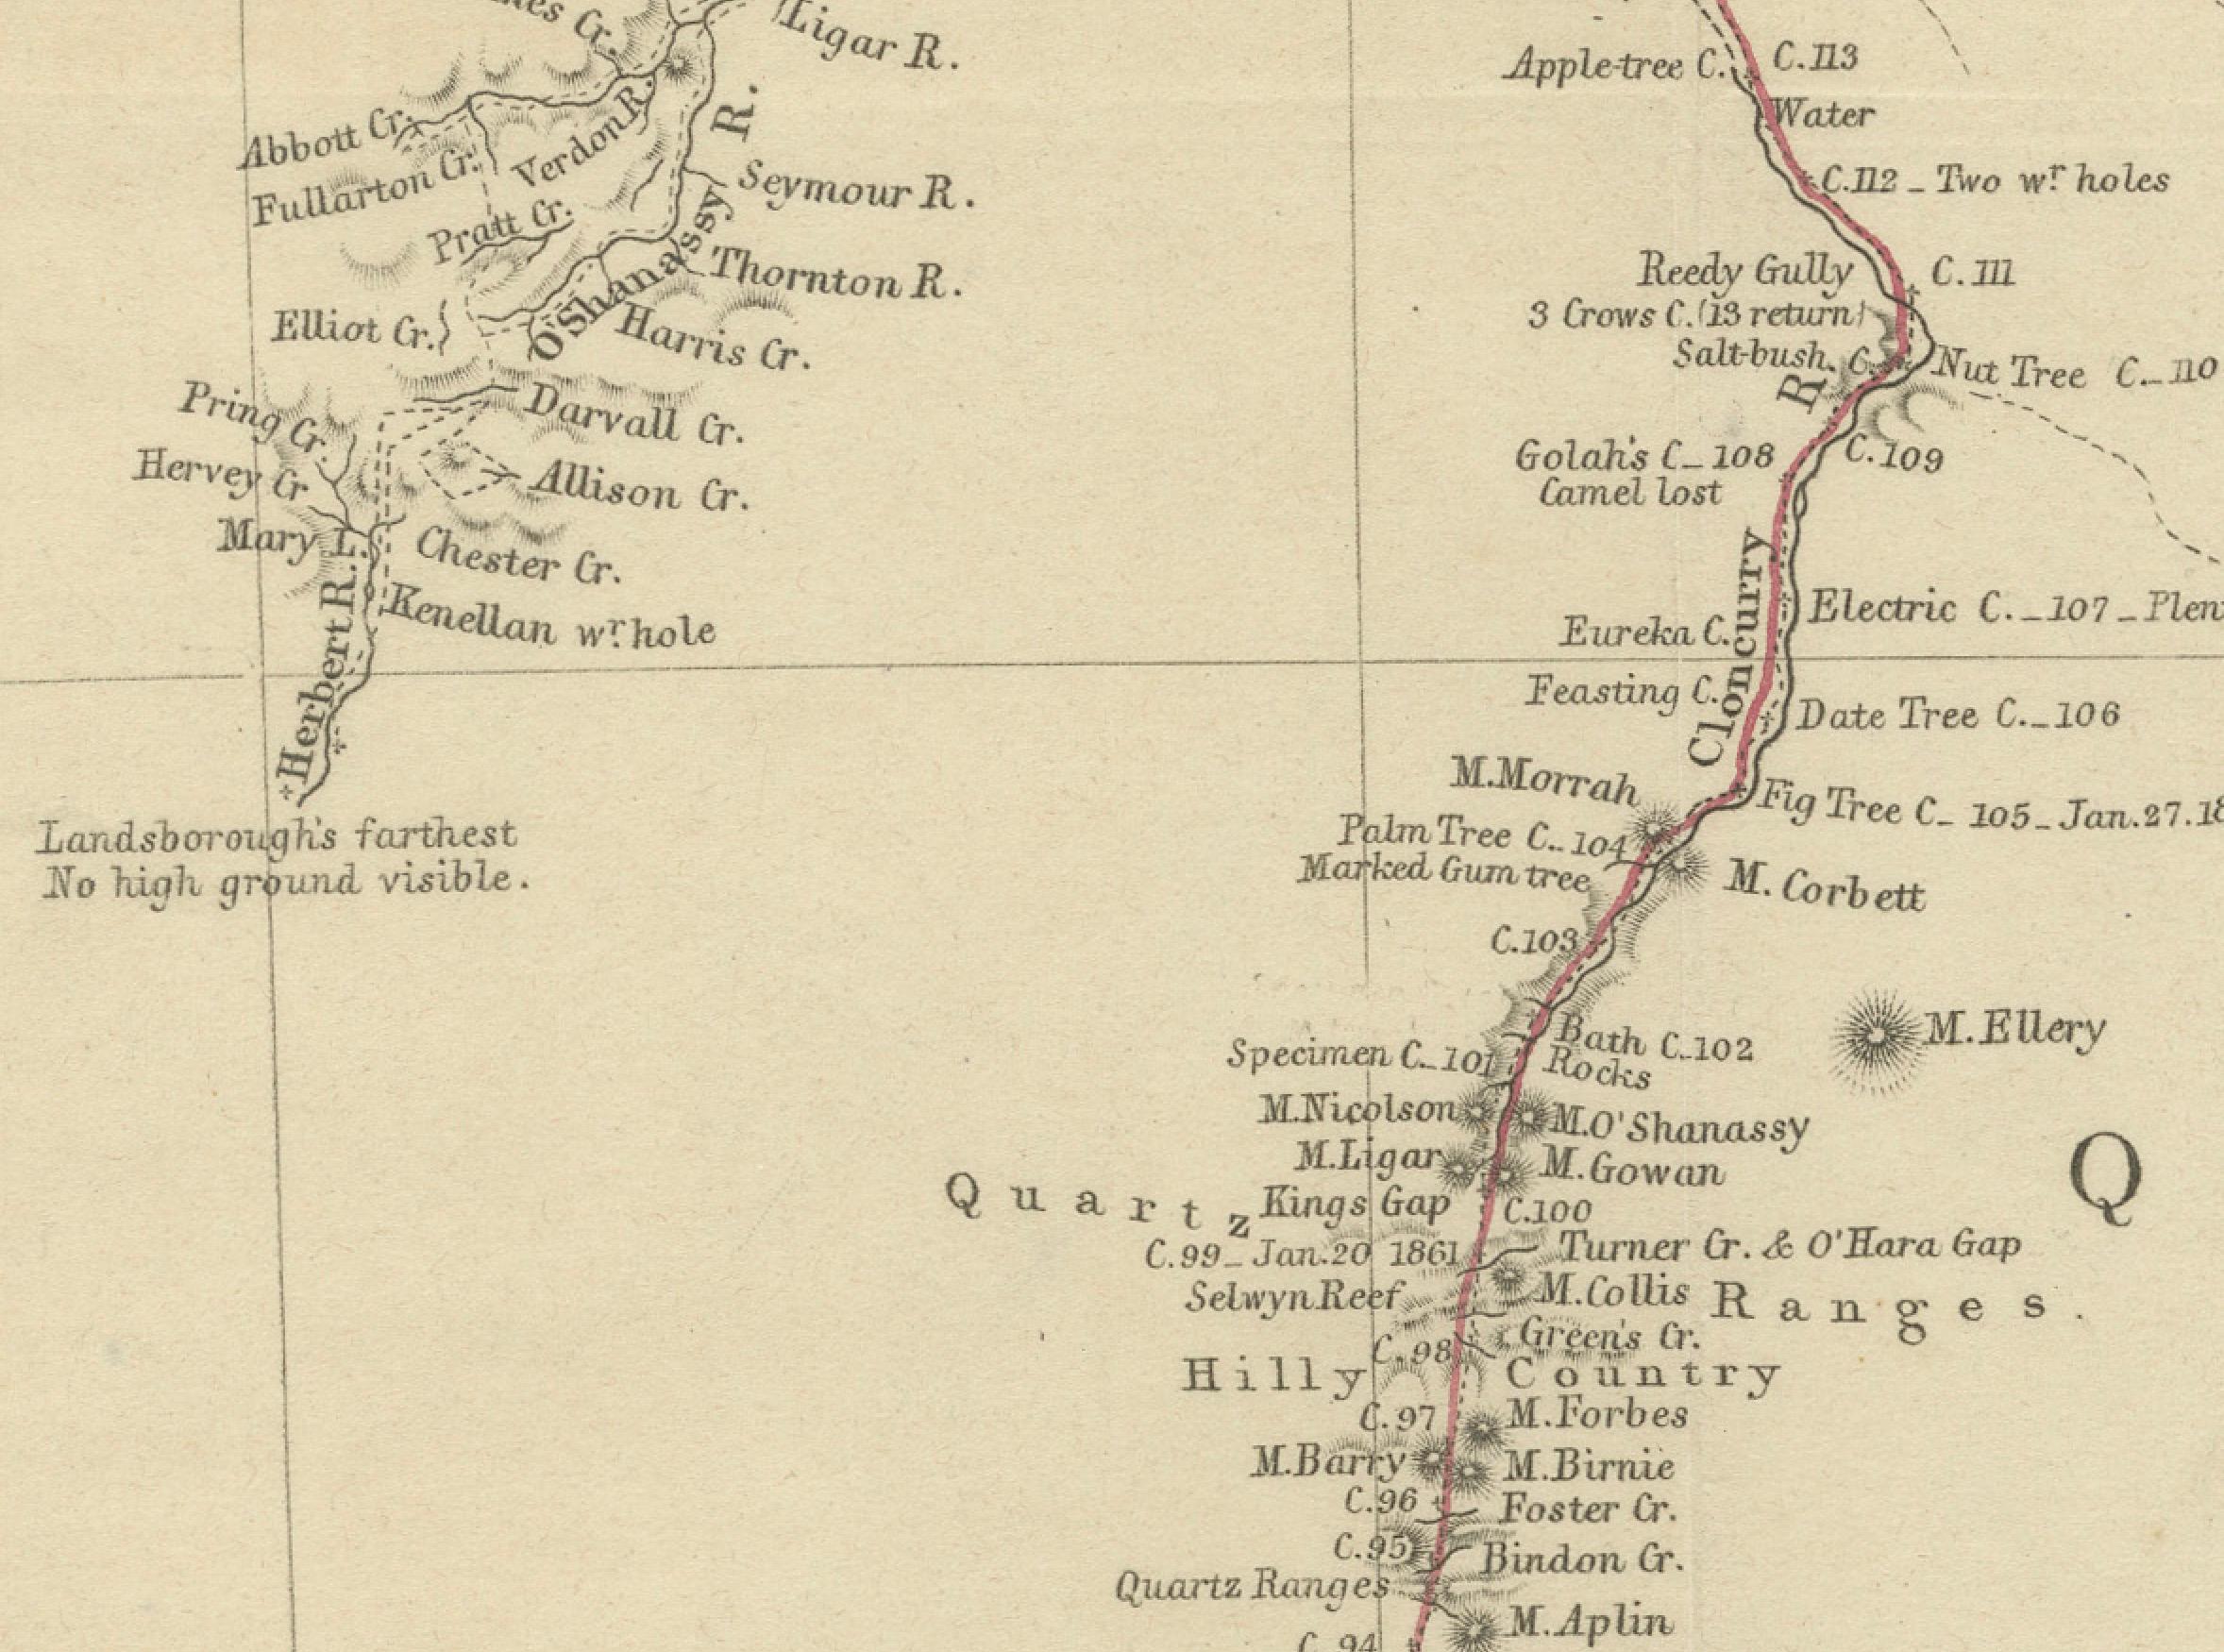 The map depicts the route of the Burke and Wills expedition, one of the most famous and tragic explorations in Australian history. This journey was the first to cross the Australian continent from south to north, starting in Melbourne and reaching